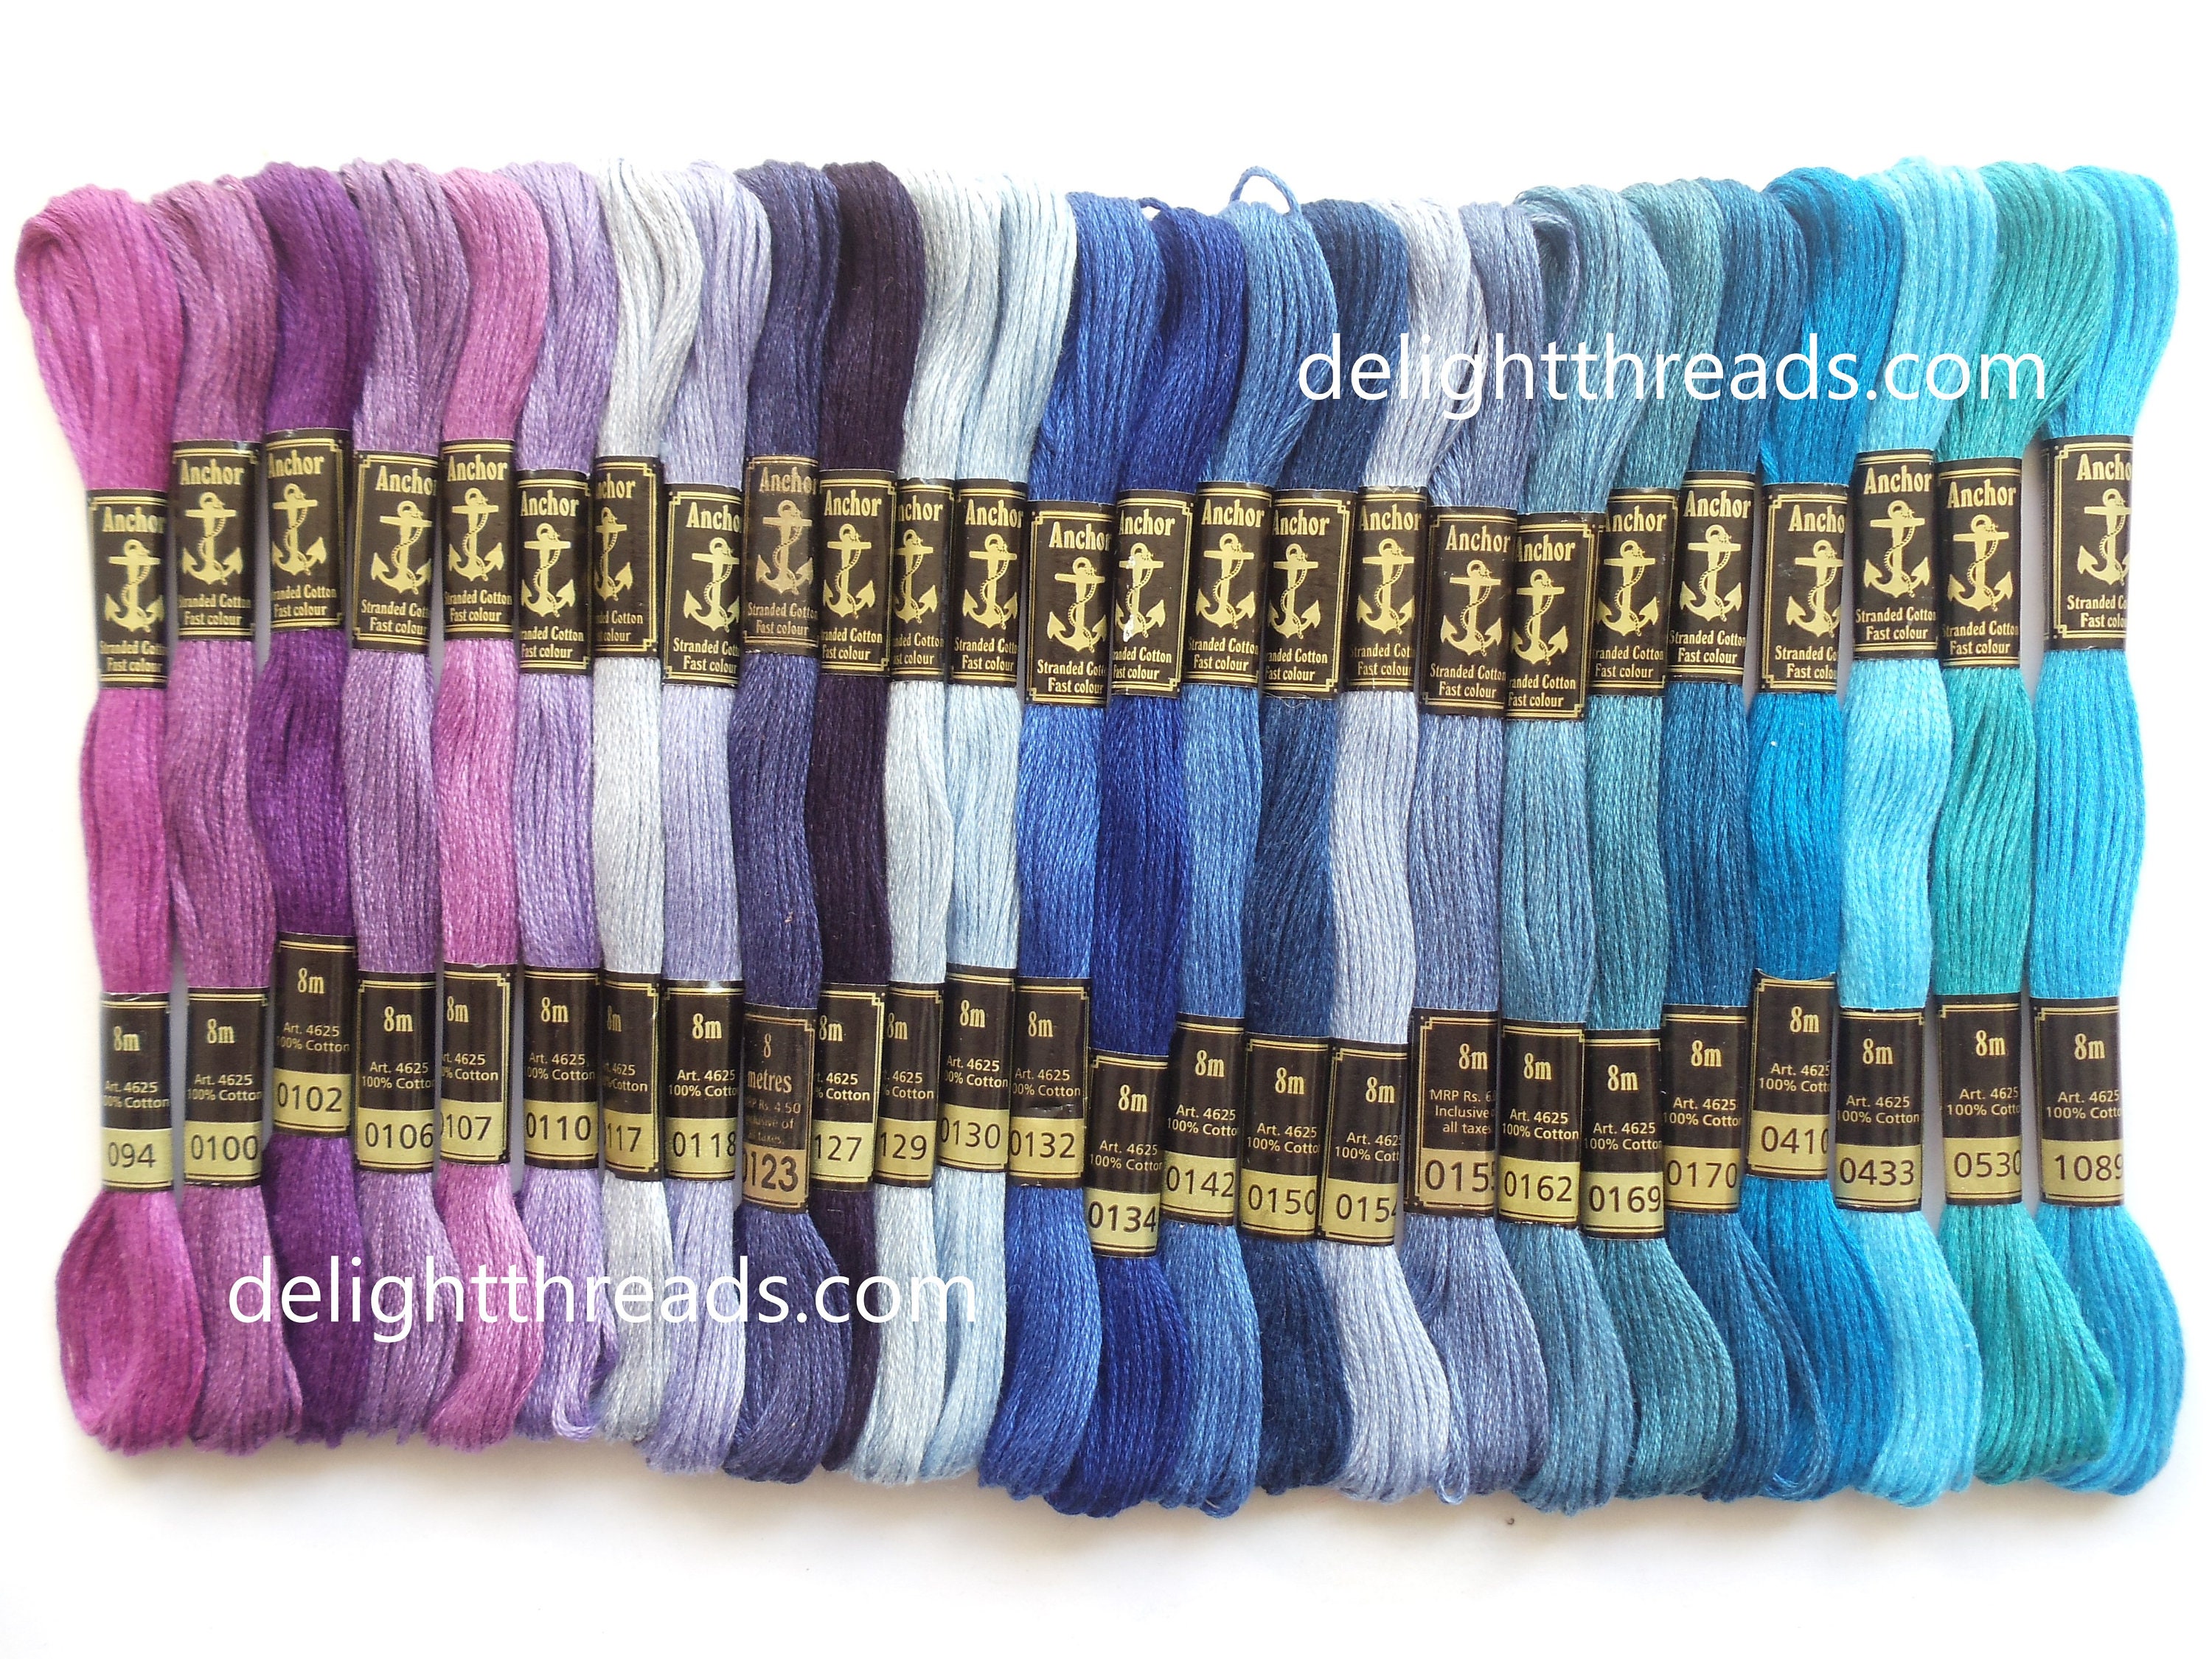 25 Anchor Multicolor 1335 Cross Stitch Cotton Embroidery Thread Floss/skein.  